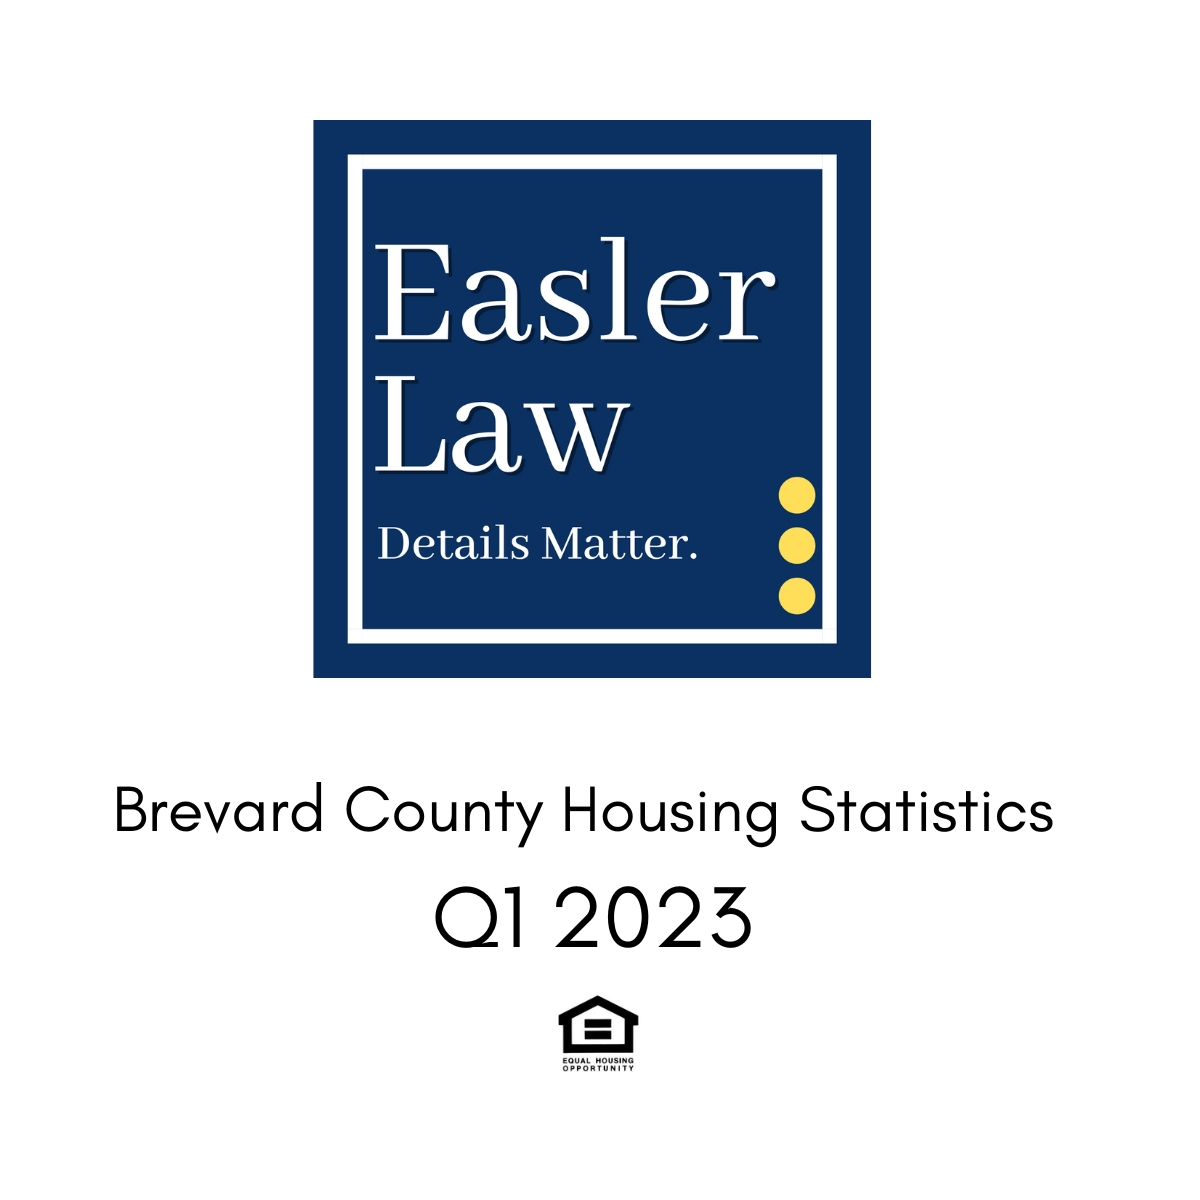 Brevard County Real Estate Market Shows Mixed Performance in Q1 2023